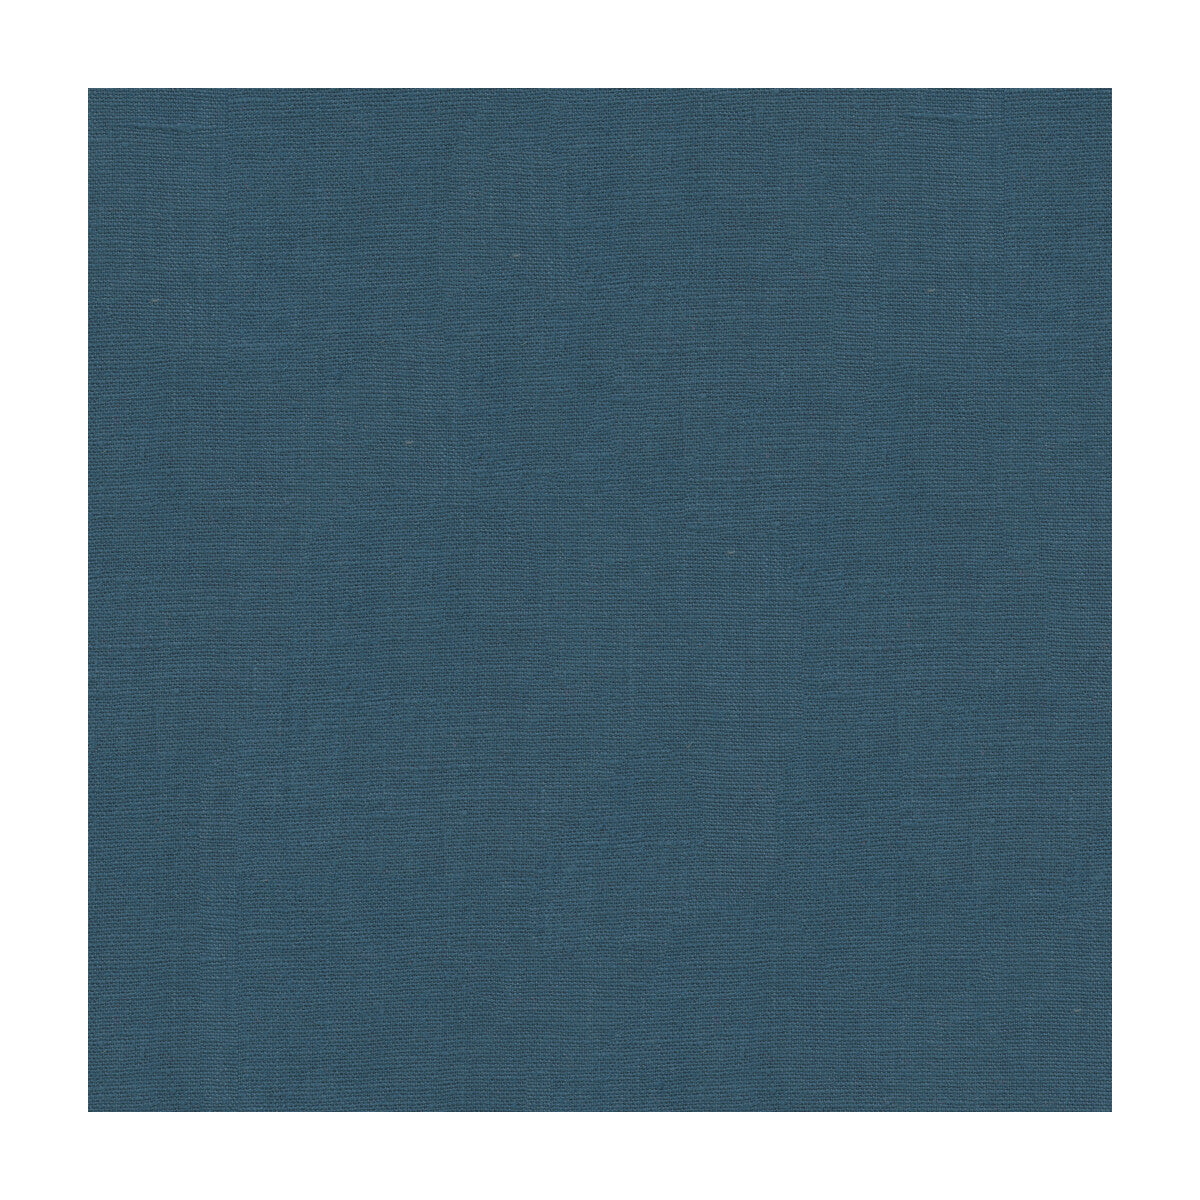 Dublin fabric in denim color - pattern 32344.5.0 - by Kravet Basics in the Perfect Plains collection